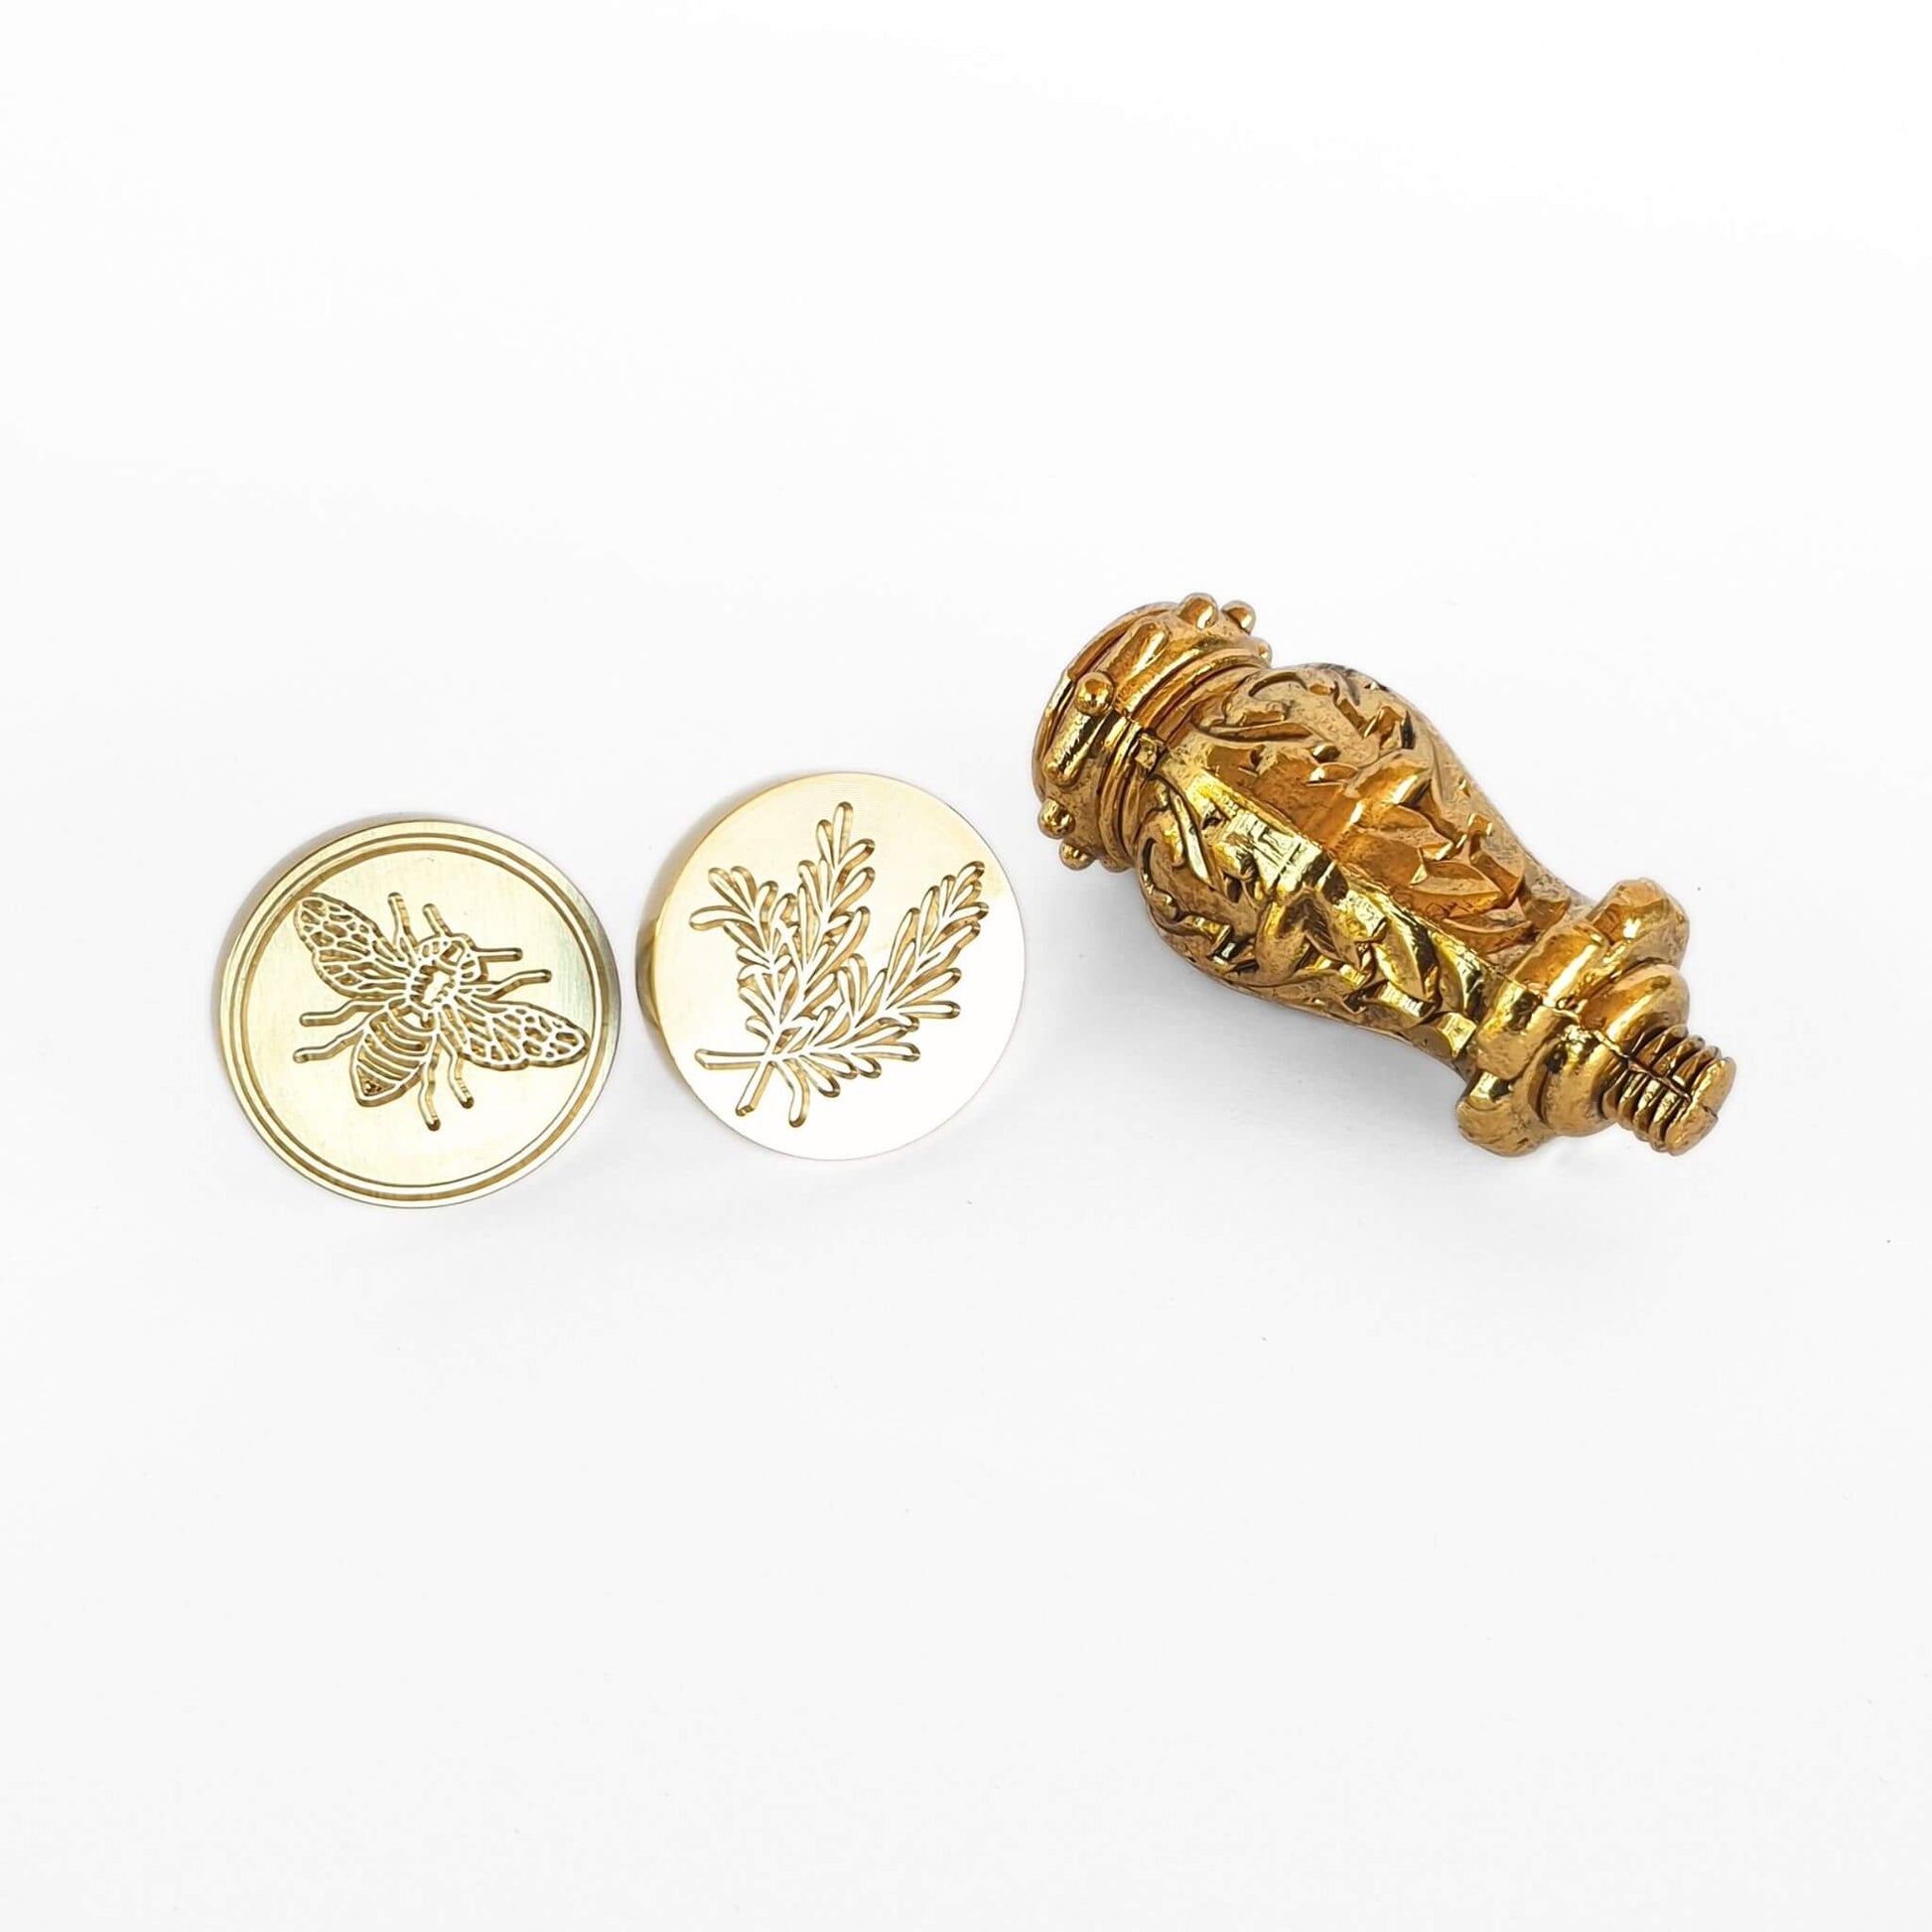 bEE AND ROSEMARY WAX SEAL HEADS AND tUSCAN WAX SEAL DECORATIVE HANDLE IN GOLD